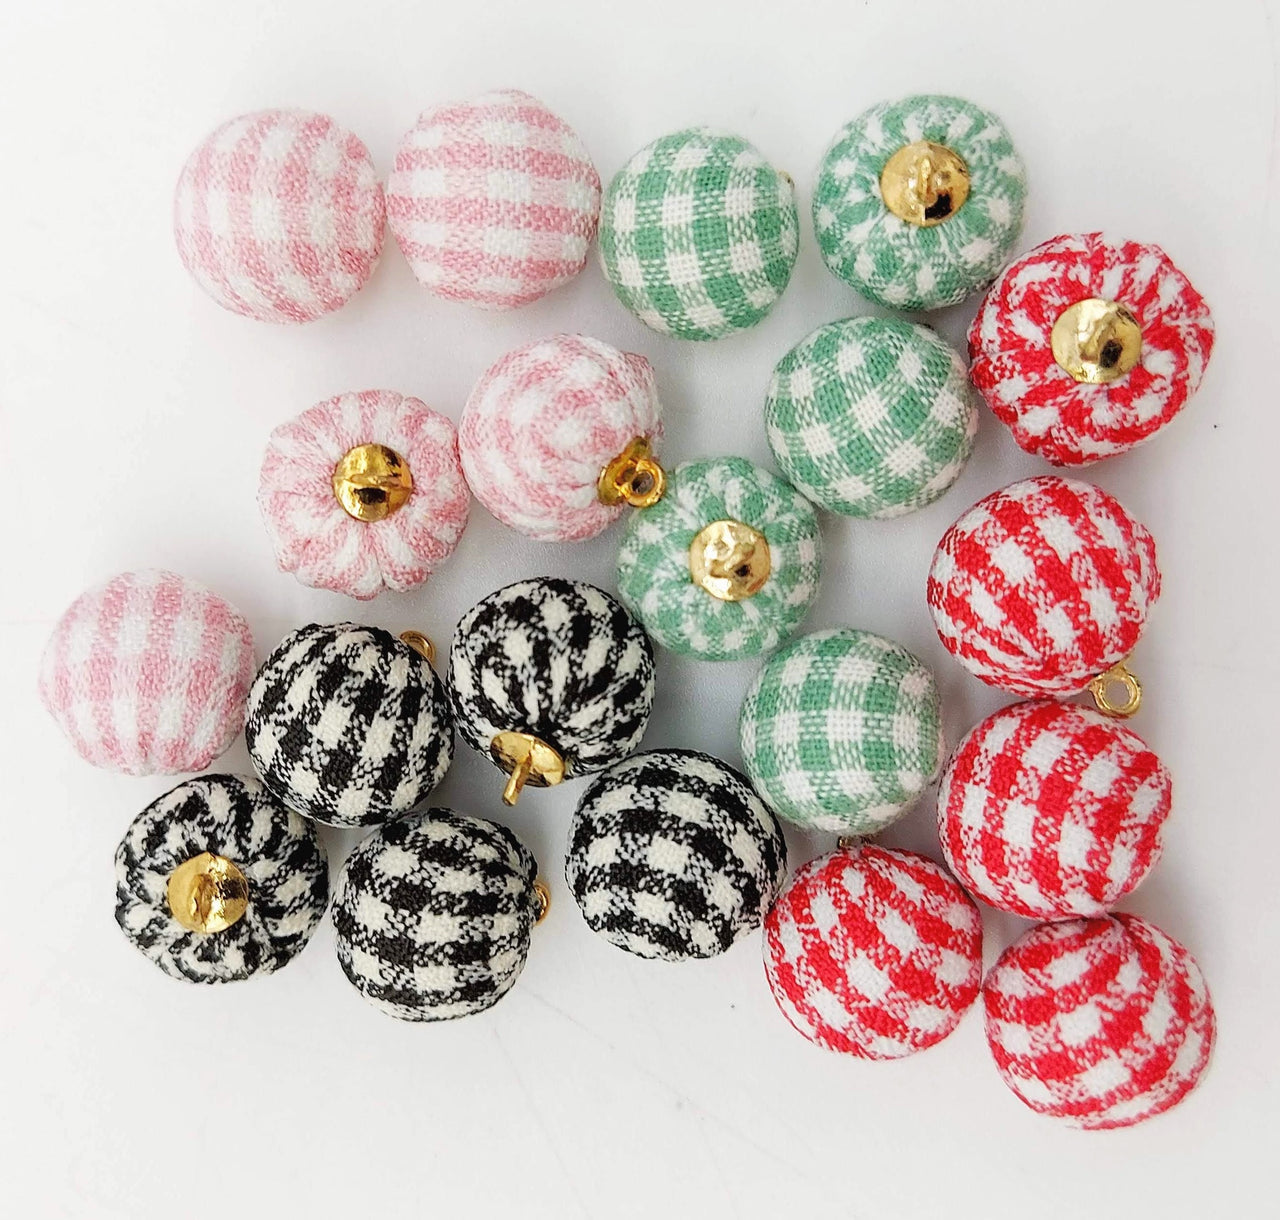 Pink and White Checkered Cotton Small Fabric Balls Tassel, Button with Ring Cap, Decorative Tassels